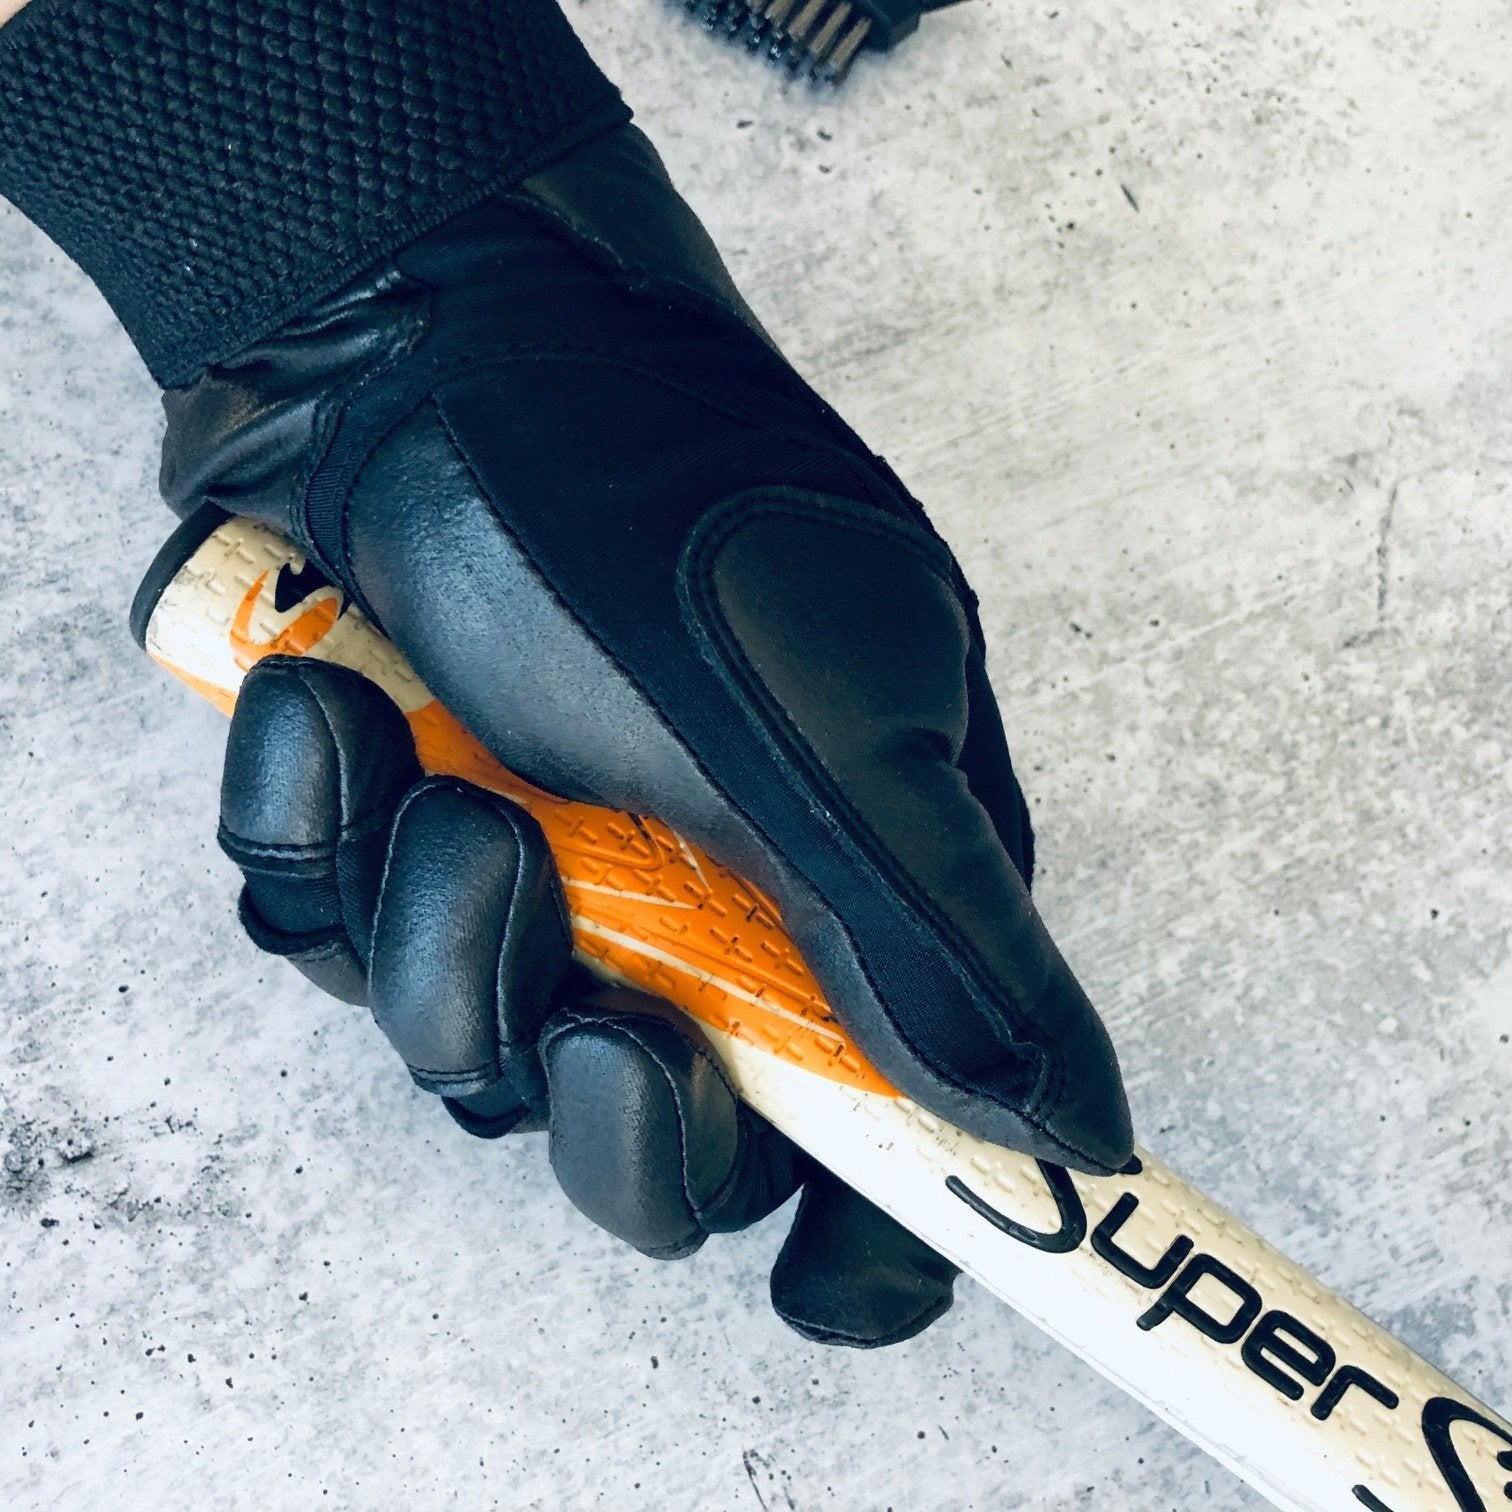 Fore Fingers Winter Golf Gloves